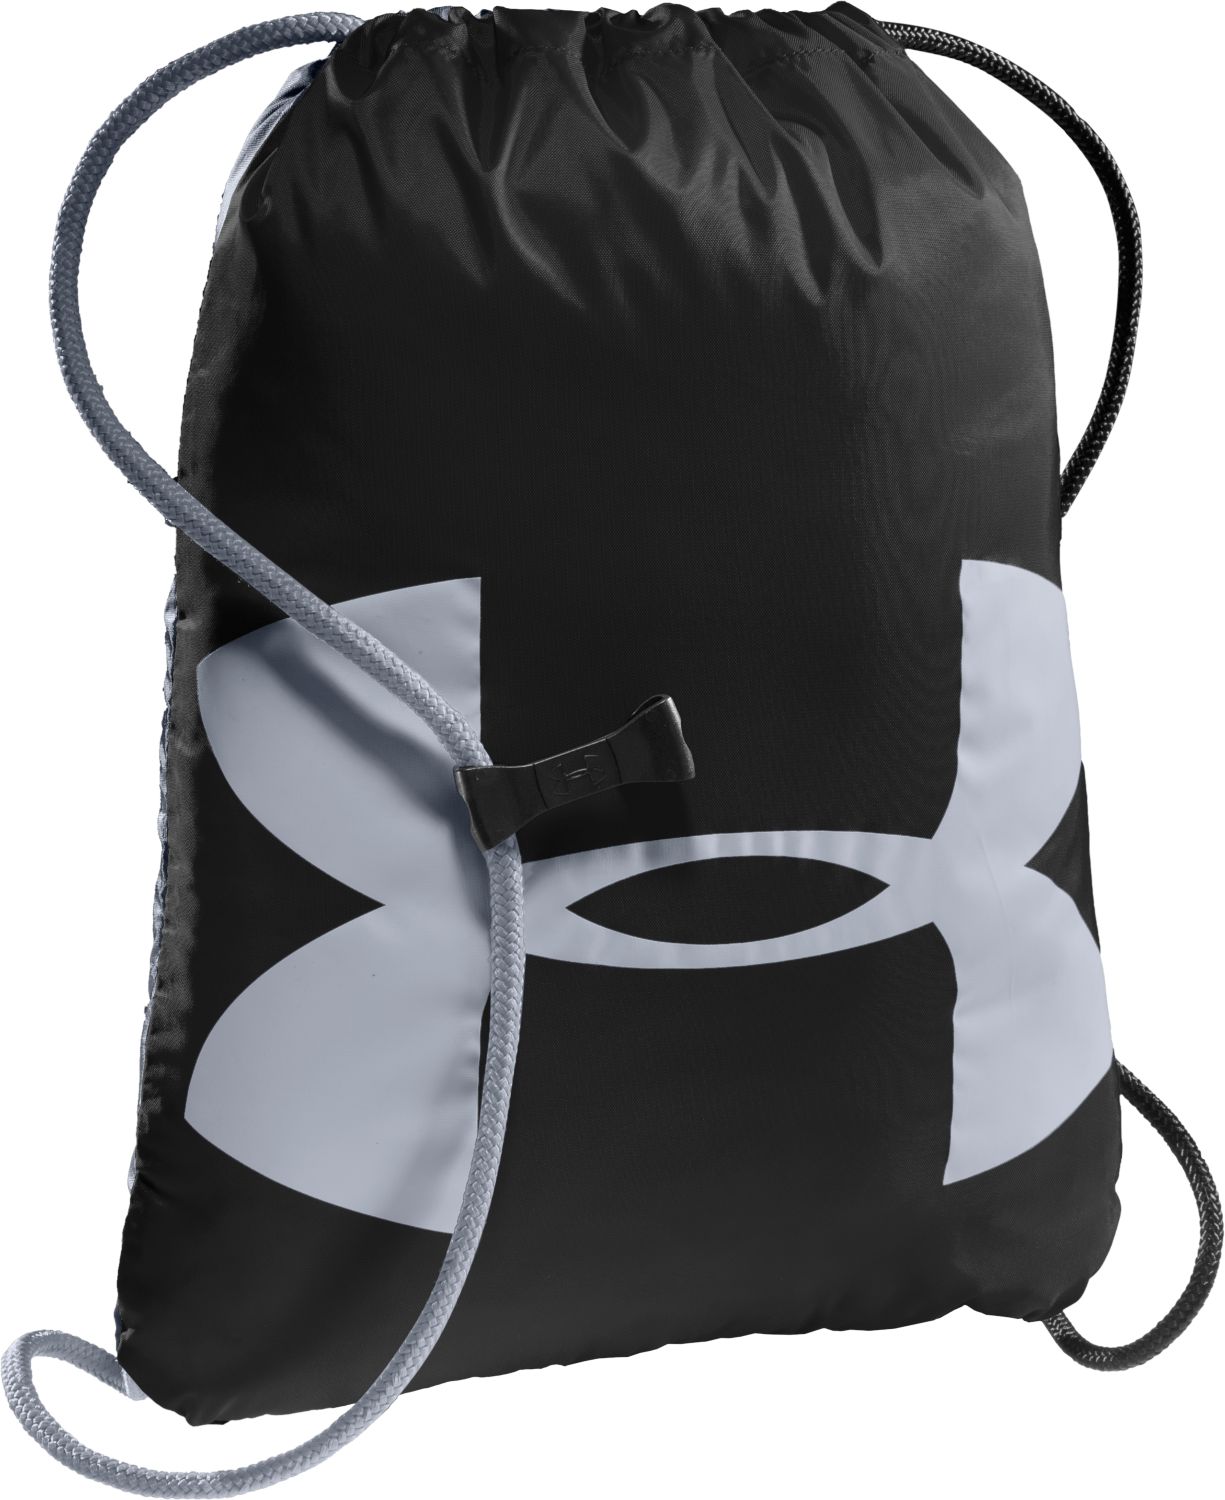 Under Armour Adult Ozsee Sackpack  Black 005Steel  One Size Fits All   Amazonin Clothing  Accessories